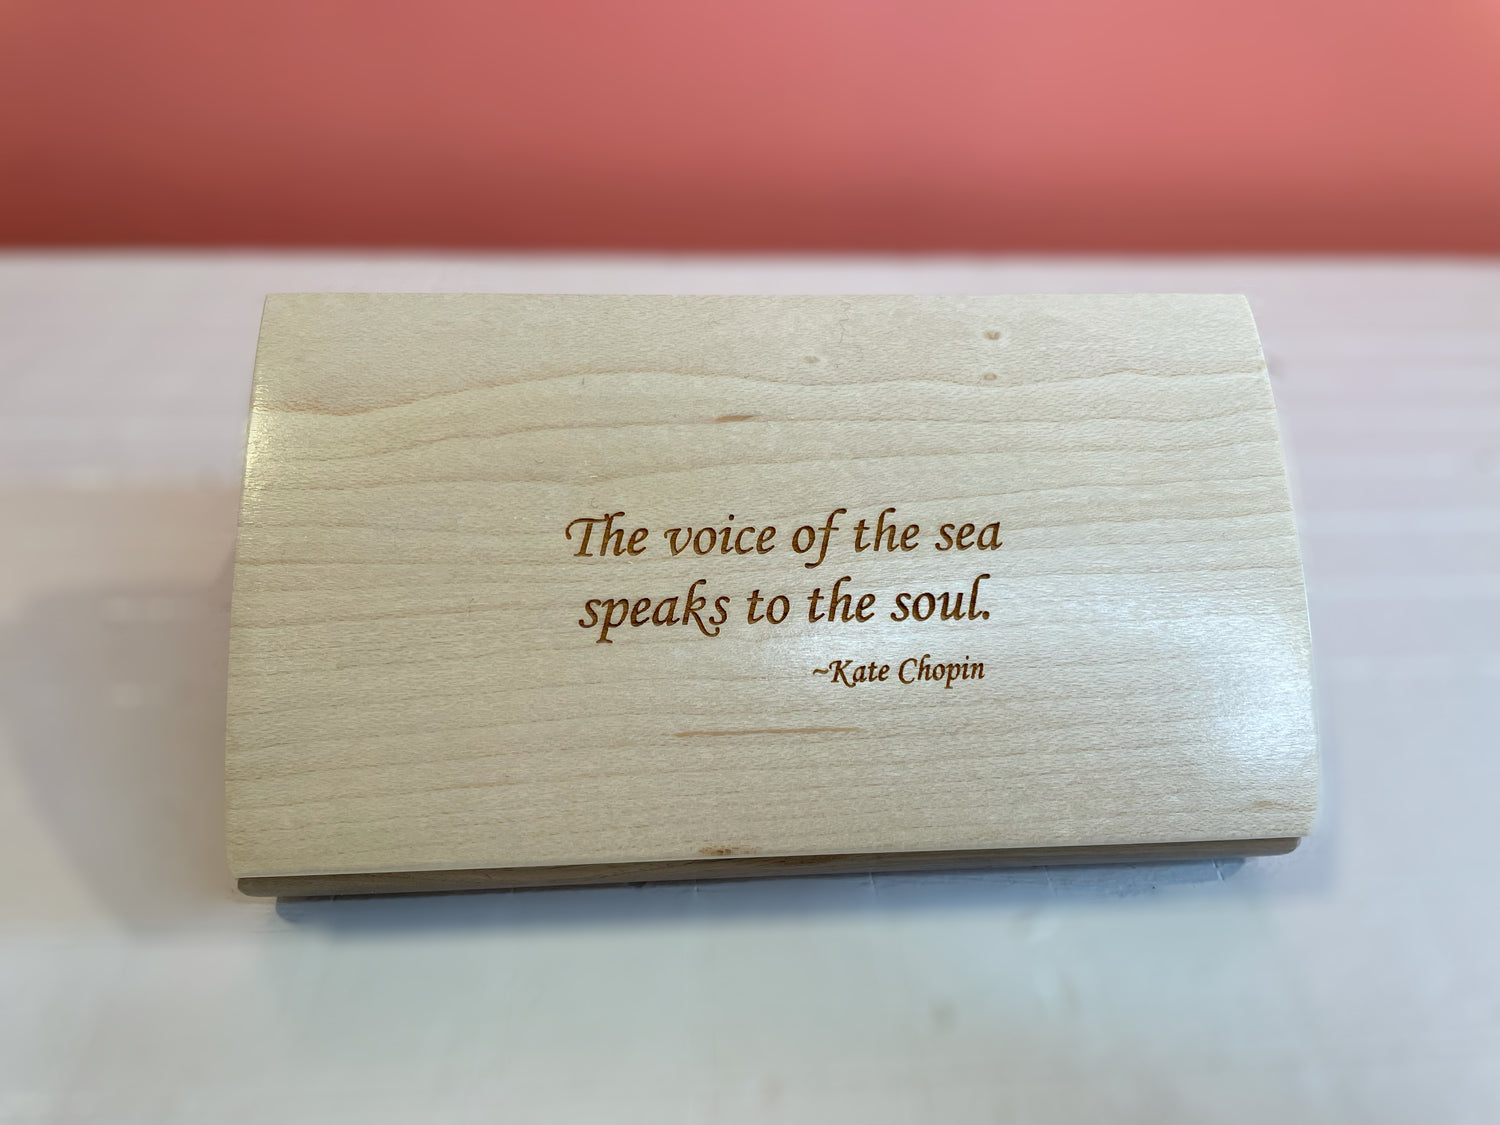 Mikutowski Woodworking Inspirational Box - Voice Of The Sea available at The Good Life Boutique